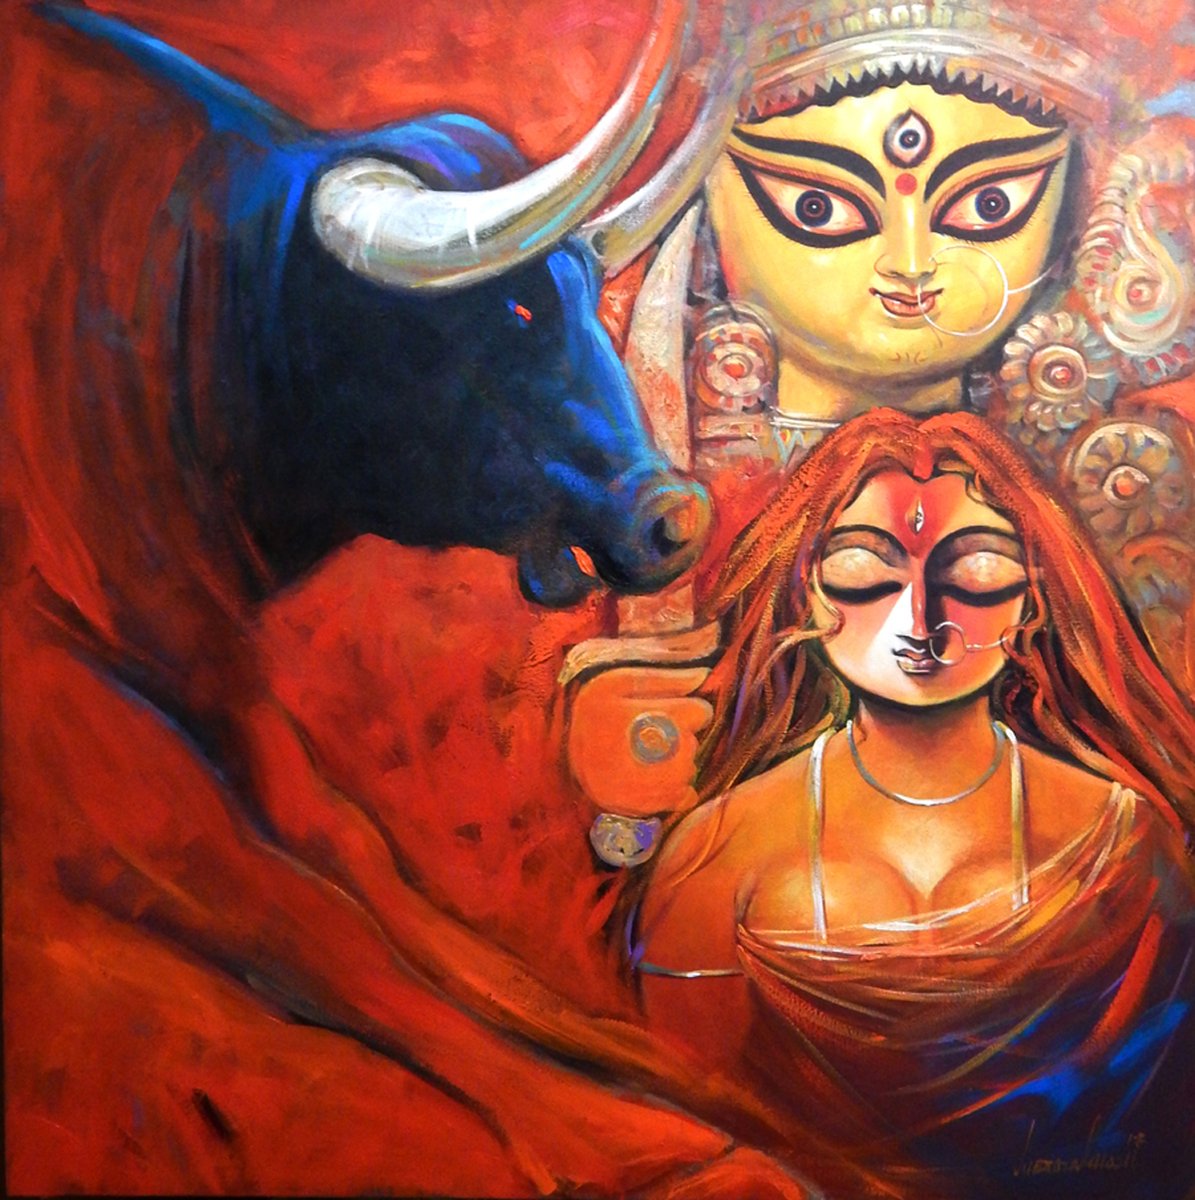 A depiction of the power and courage of Goddess Shakti. 
#Art #Artist #Colors #CanvasPainting #PaintingForSale #HandPainting #ContemporaryArt #AbstractPaintings #ModernPaintings #AcrylicPaintings #FigurativePainting